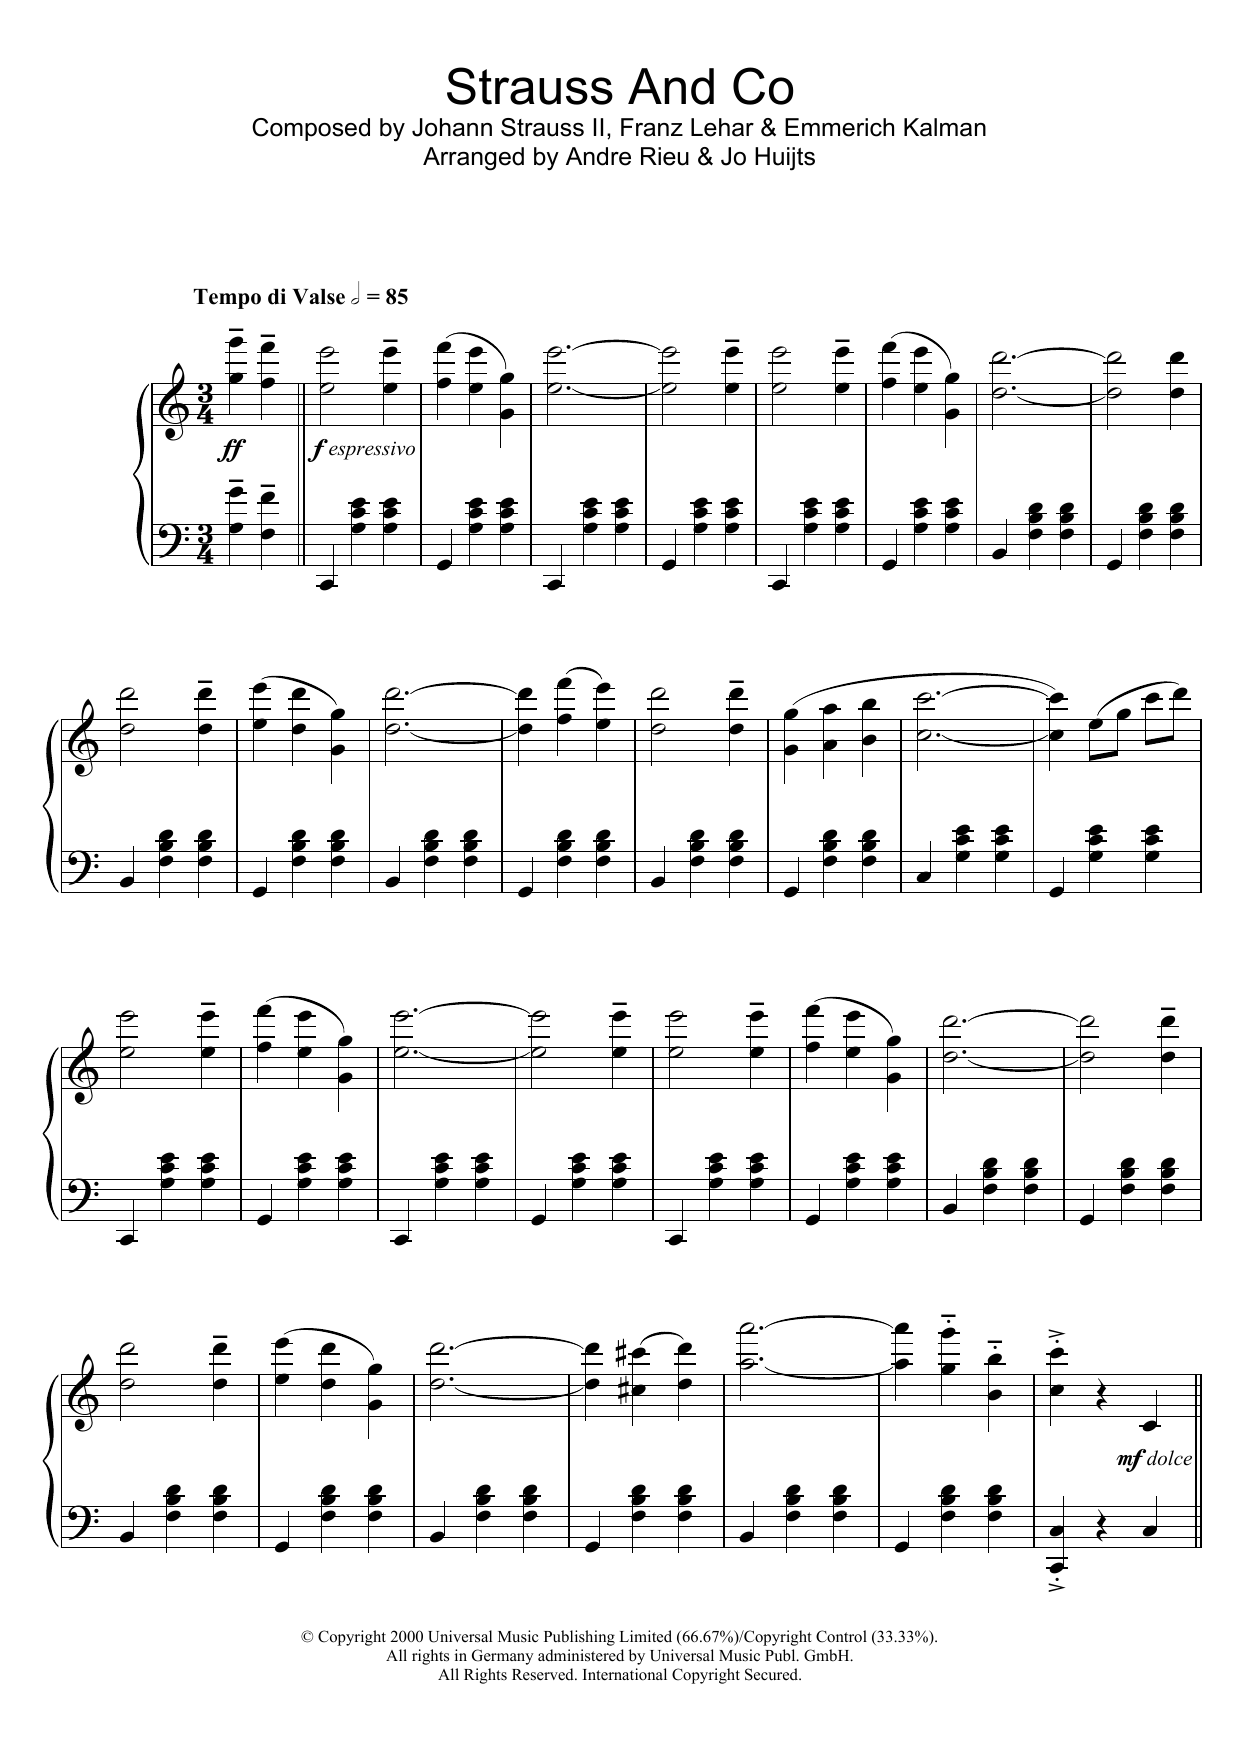 Andre Rieu Strauss & Co sheet music notes and chords. Download Printable PDF.